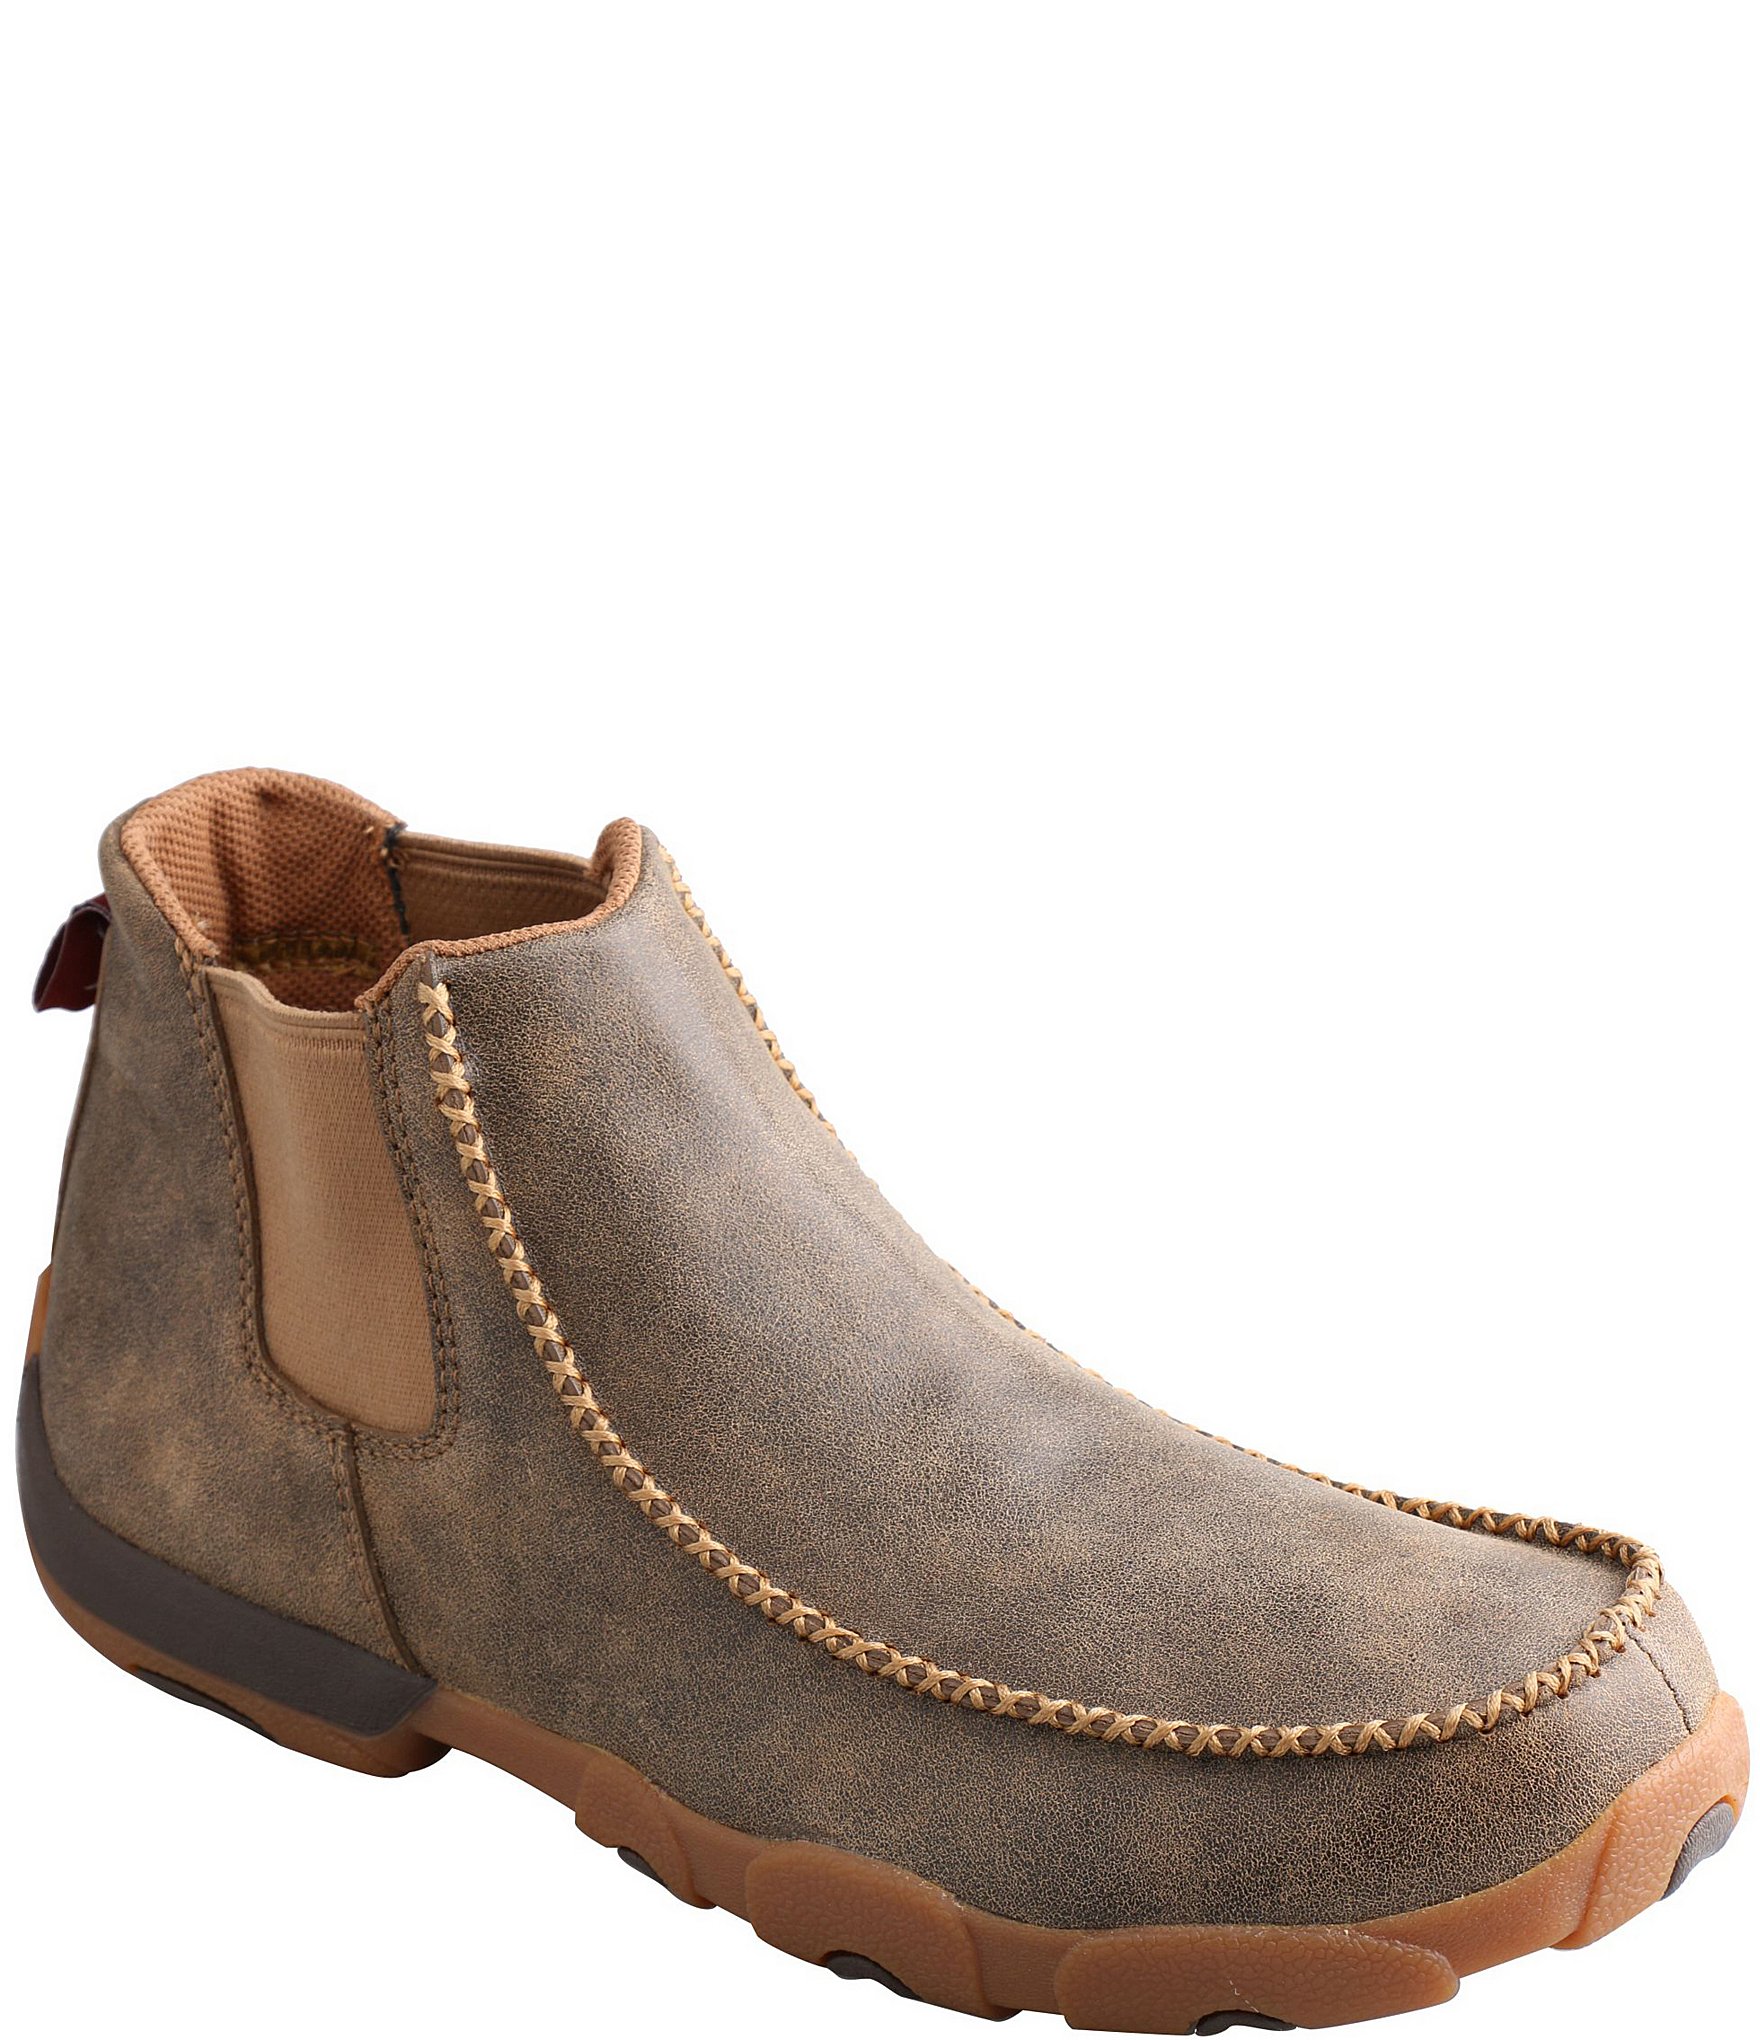 mens leather moccasin boots